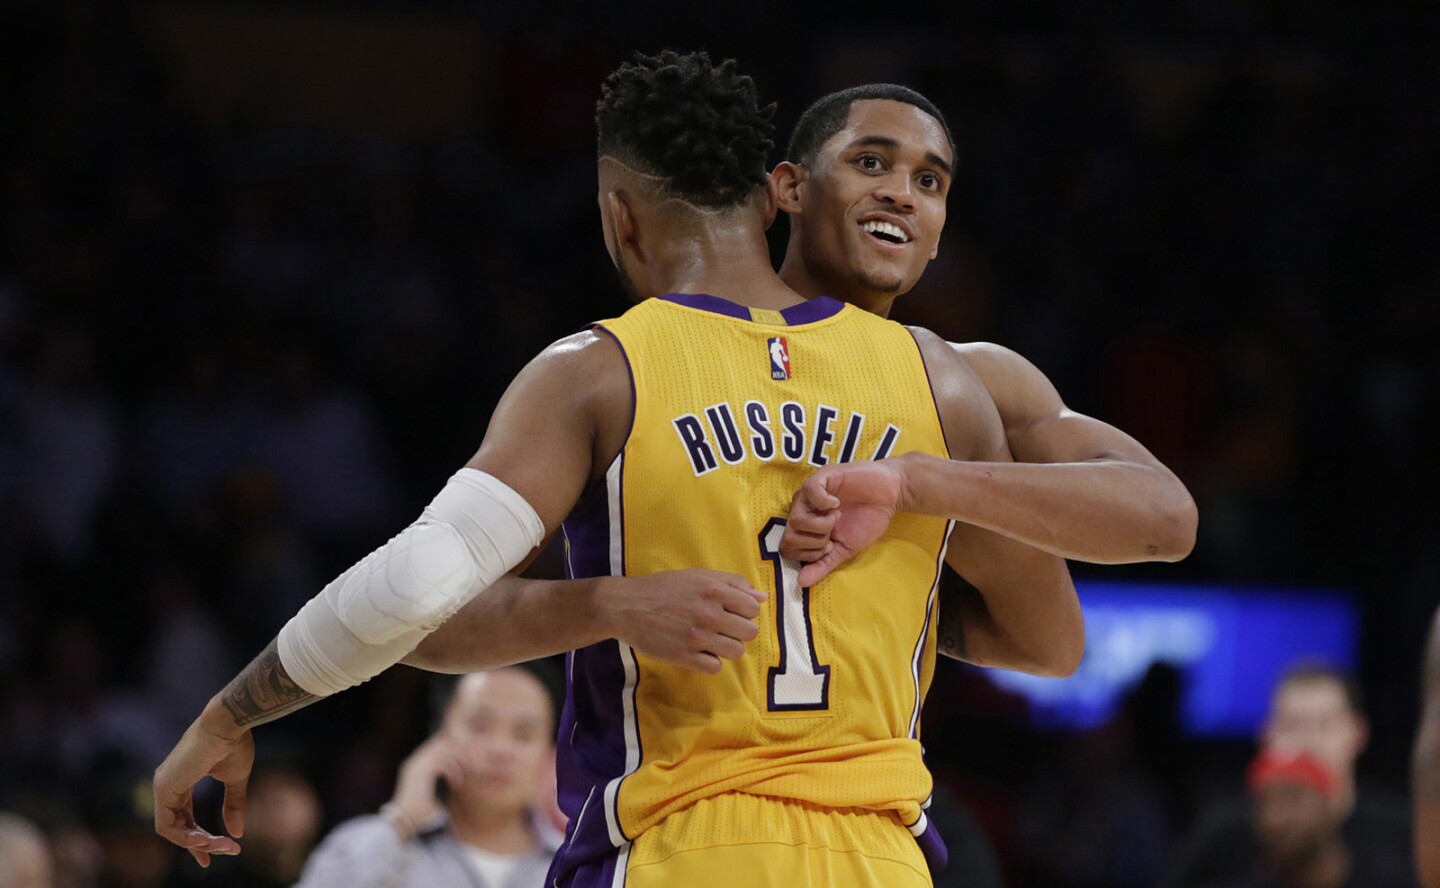 Lakers teammates Jordan Clarkson and D'Angelo Russell embrace after beating the Houston Rockets 120-114 at Staples Center.